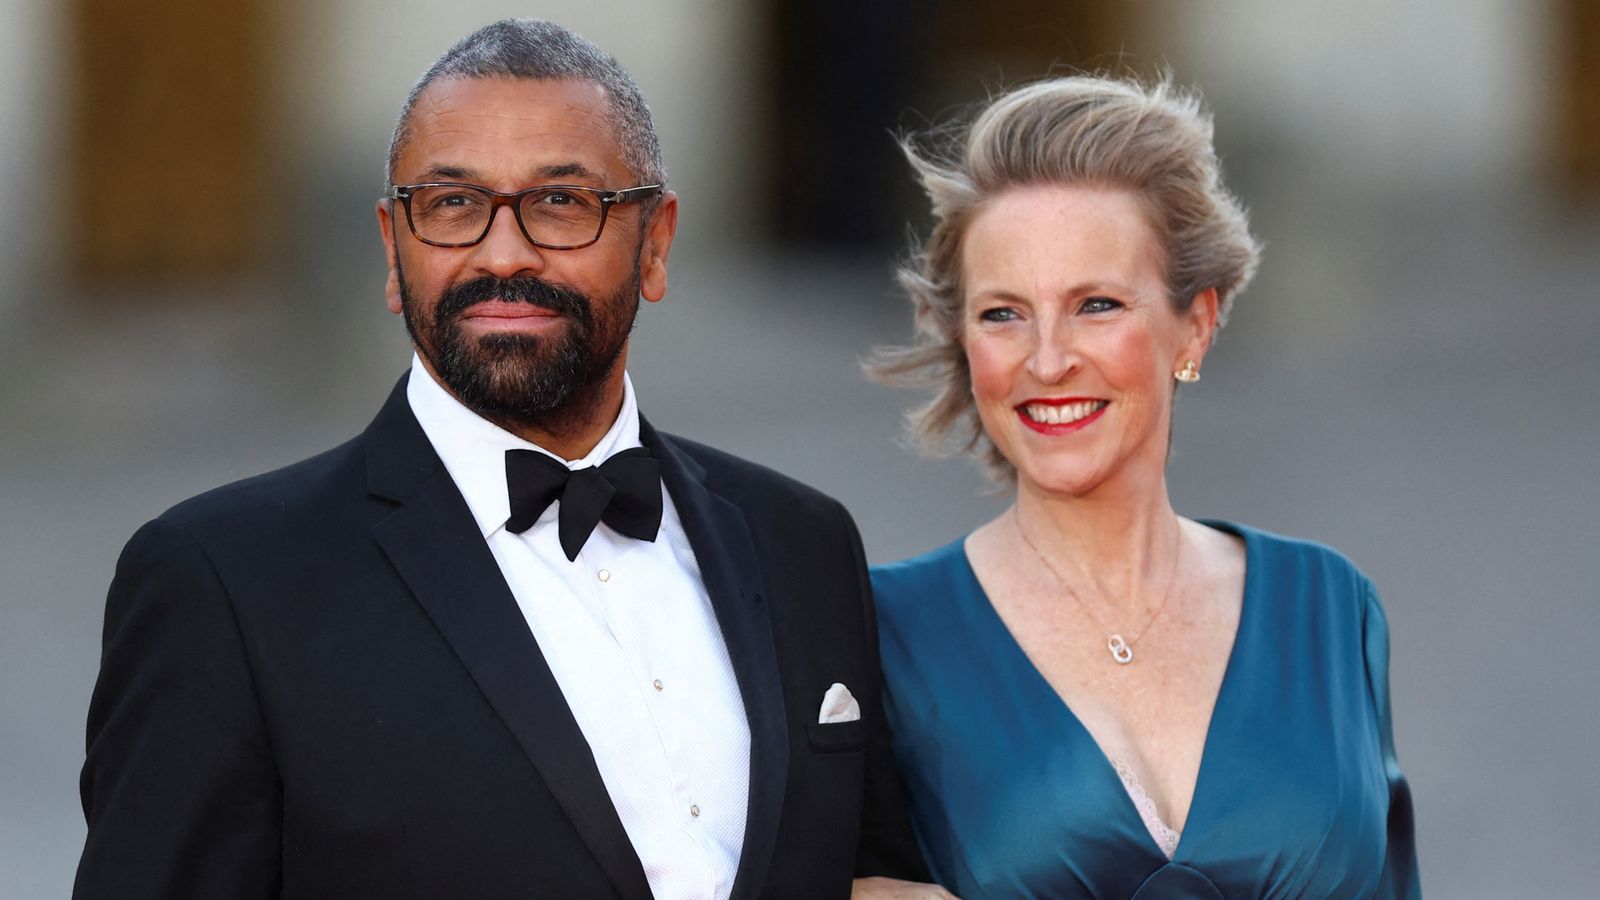 Calls for Home Secretary James Cleverly to quit after 'sickening' joke about spiking his wife's drink